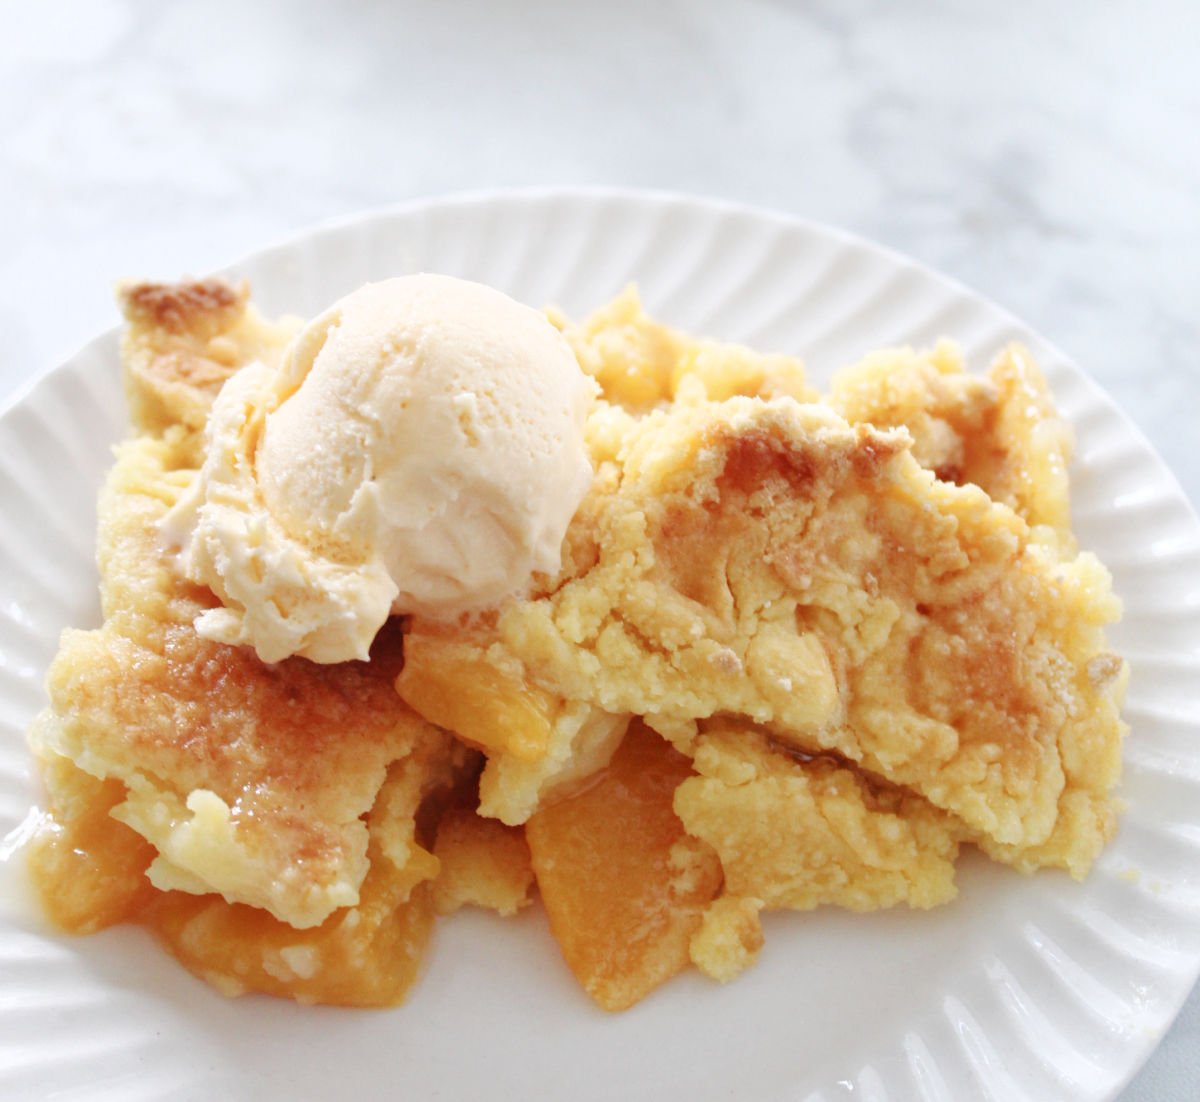 a serving of peach cobbler with a crispy topping and peaches showing. Served on a white plate.